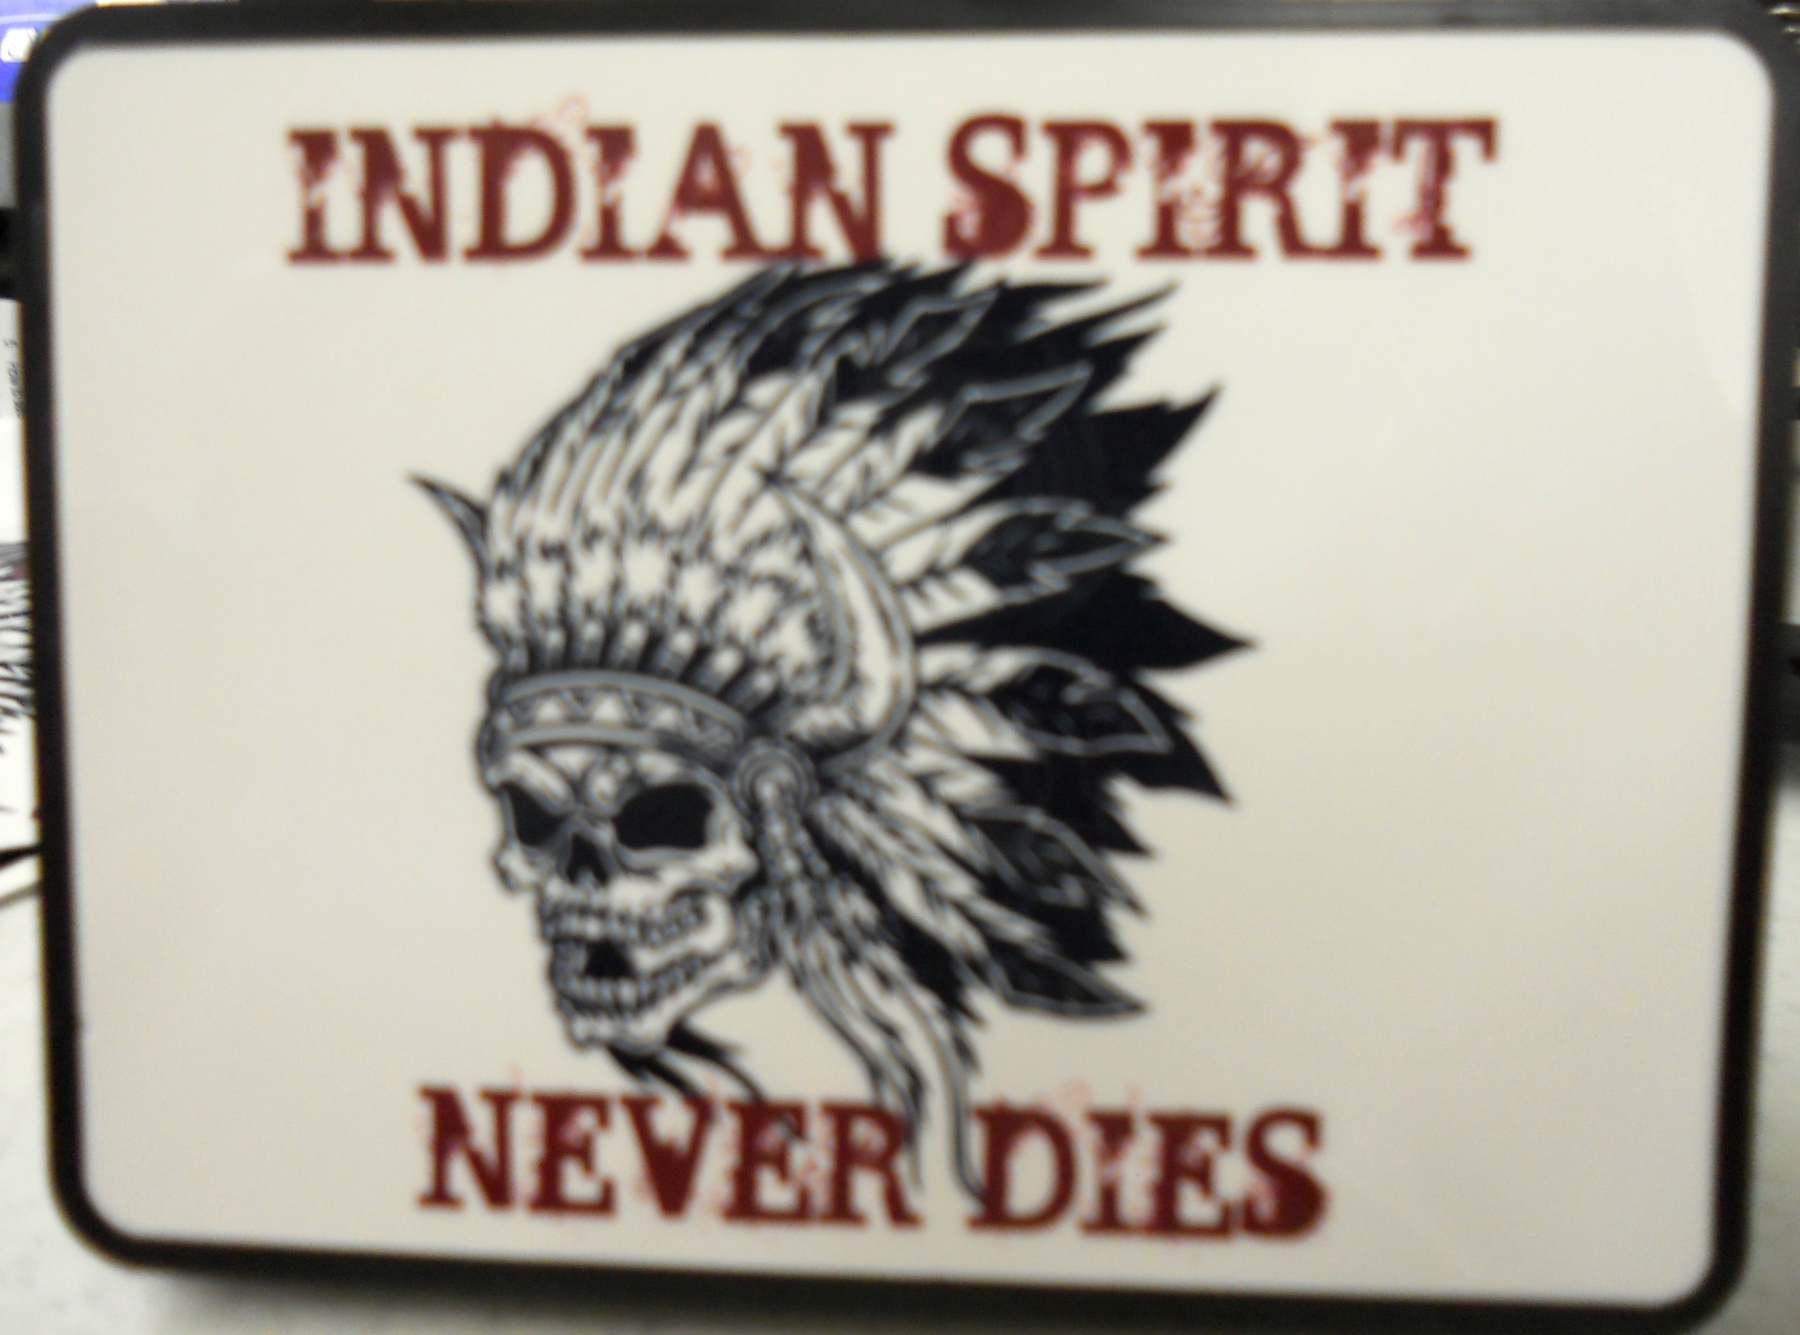 Indian Spirit Hitch cover made with sublimation printing